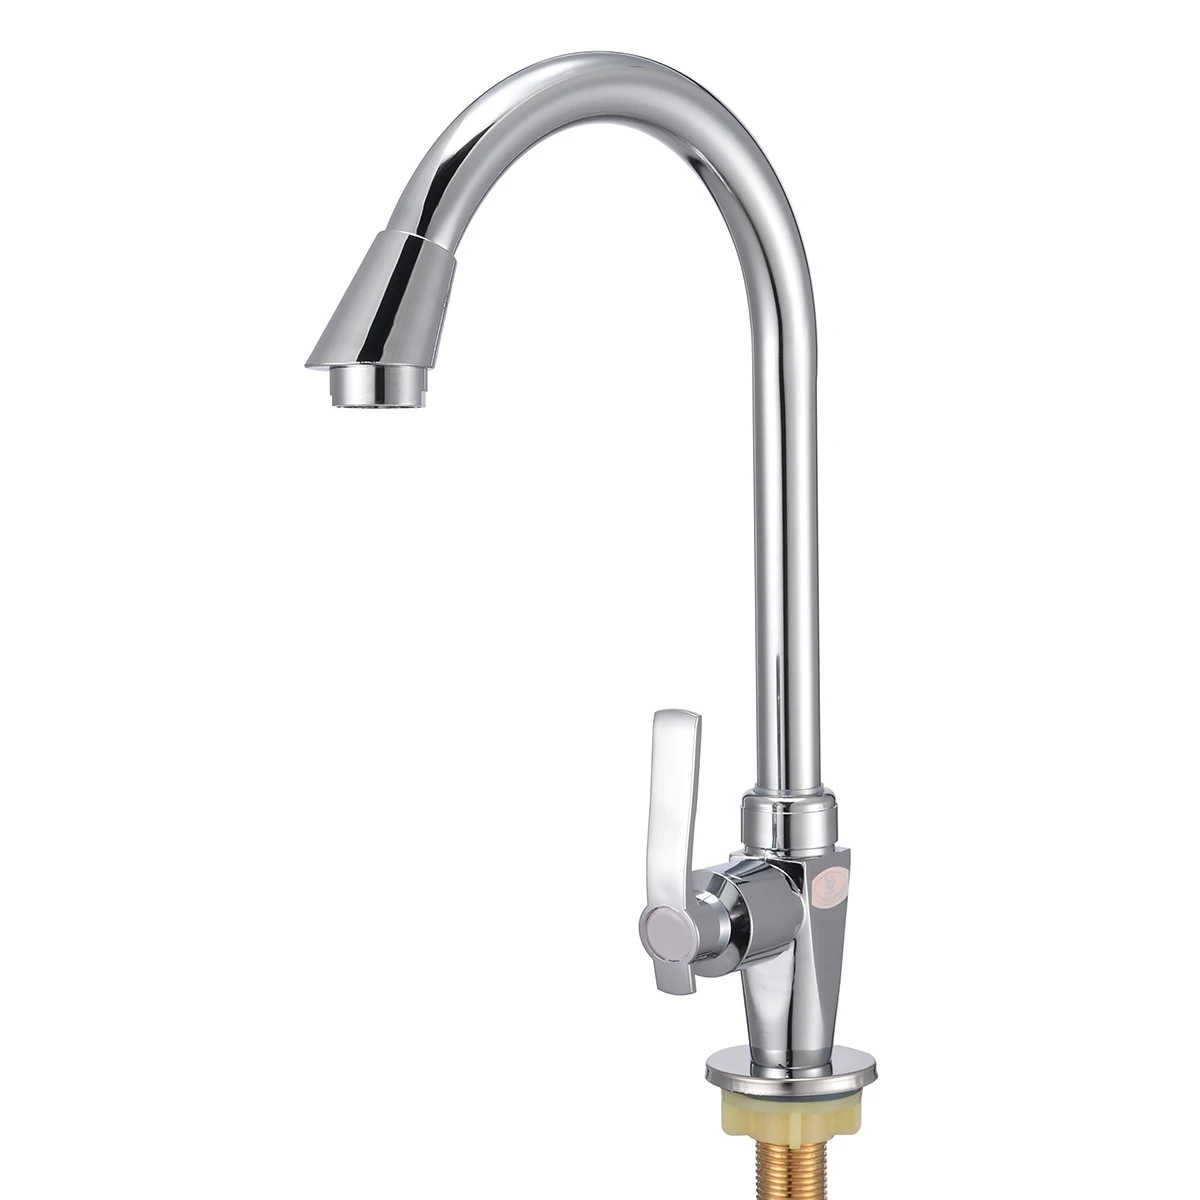 Hot Sale 360 Degree Mixer Tap Swivel Spout Water Tap Home Kitchen Wash Basin Faucets Tools Water Kitchen Faucet